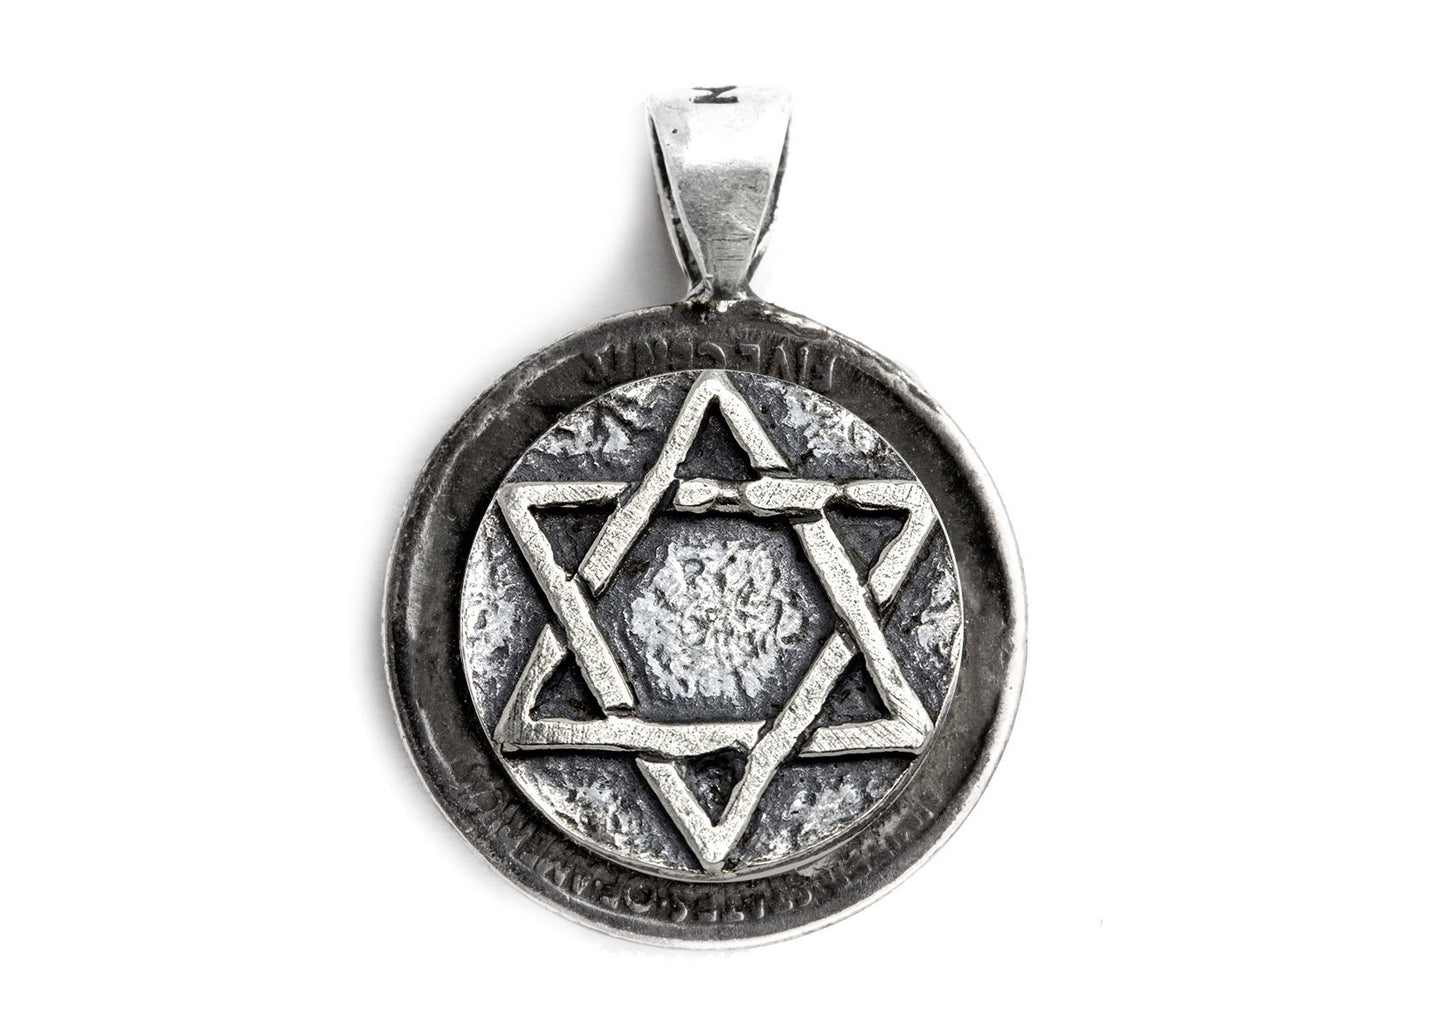 Star of David coin medallion and the Buffalo Nickel coin of USA